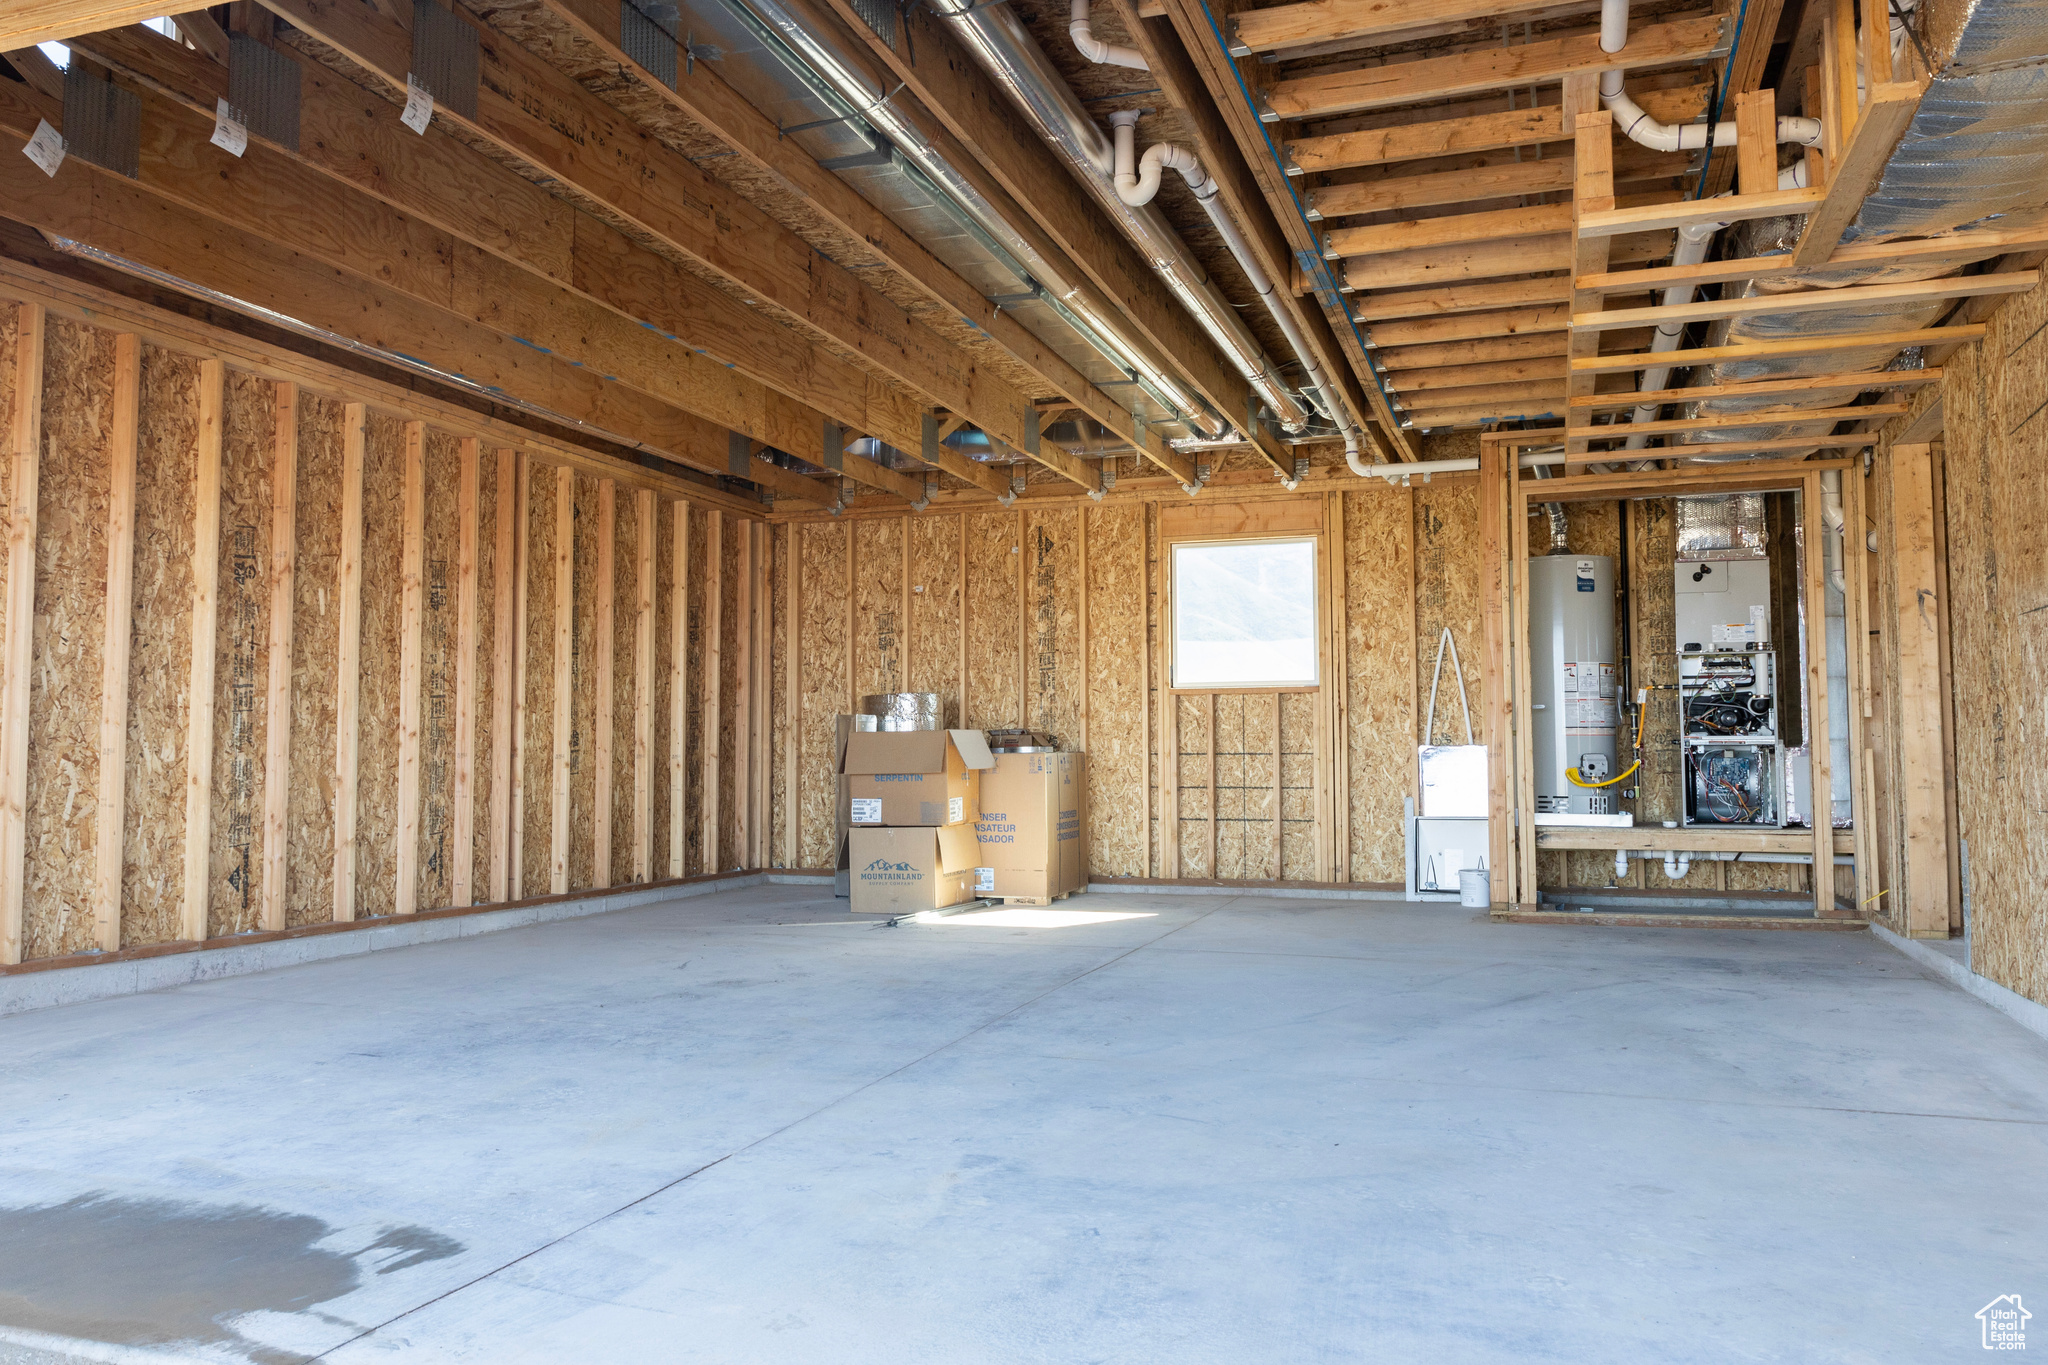 Garage featuring water heater and concrete floors